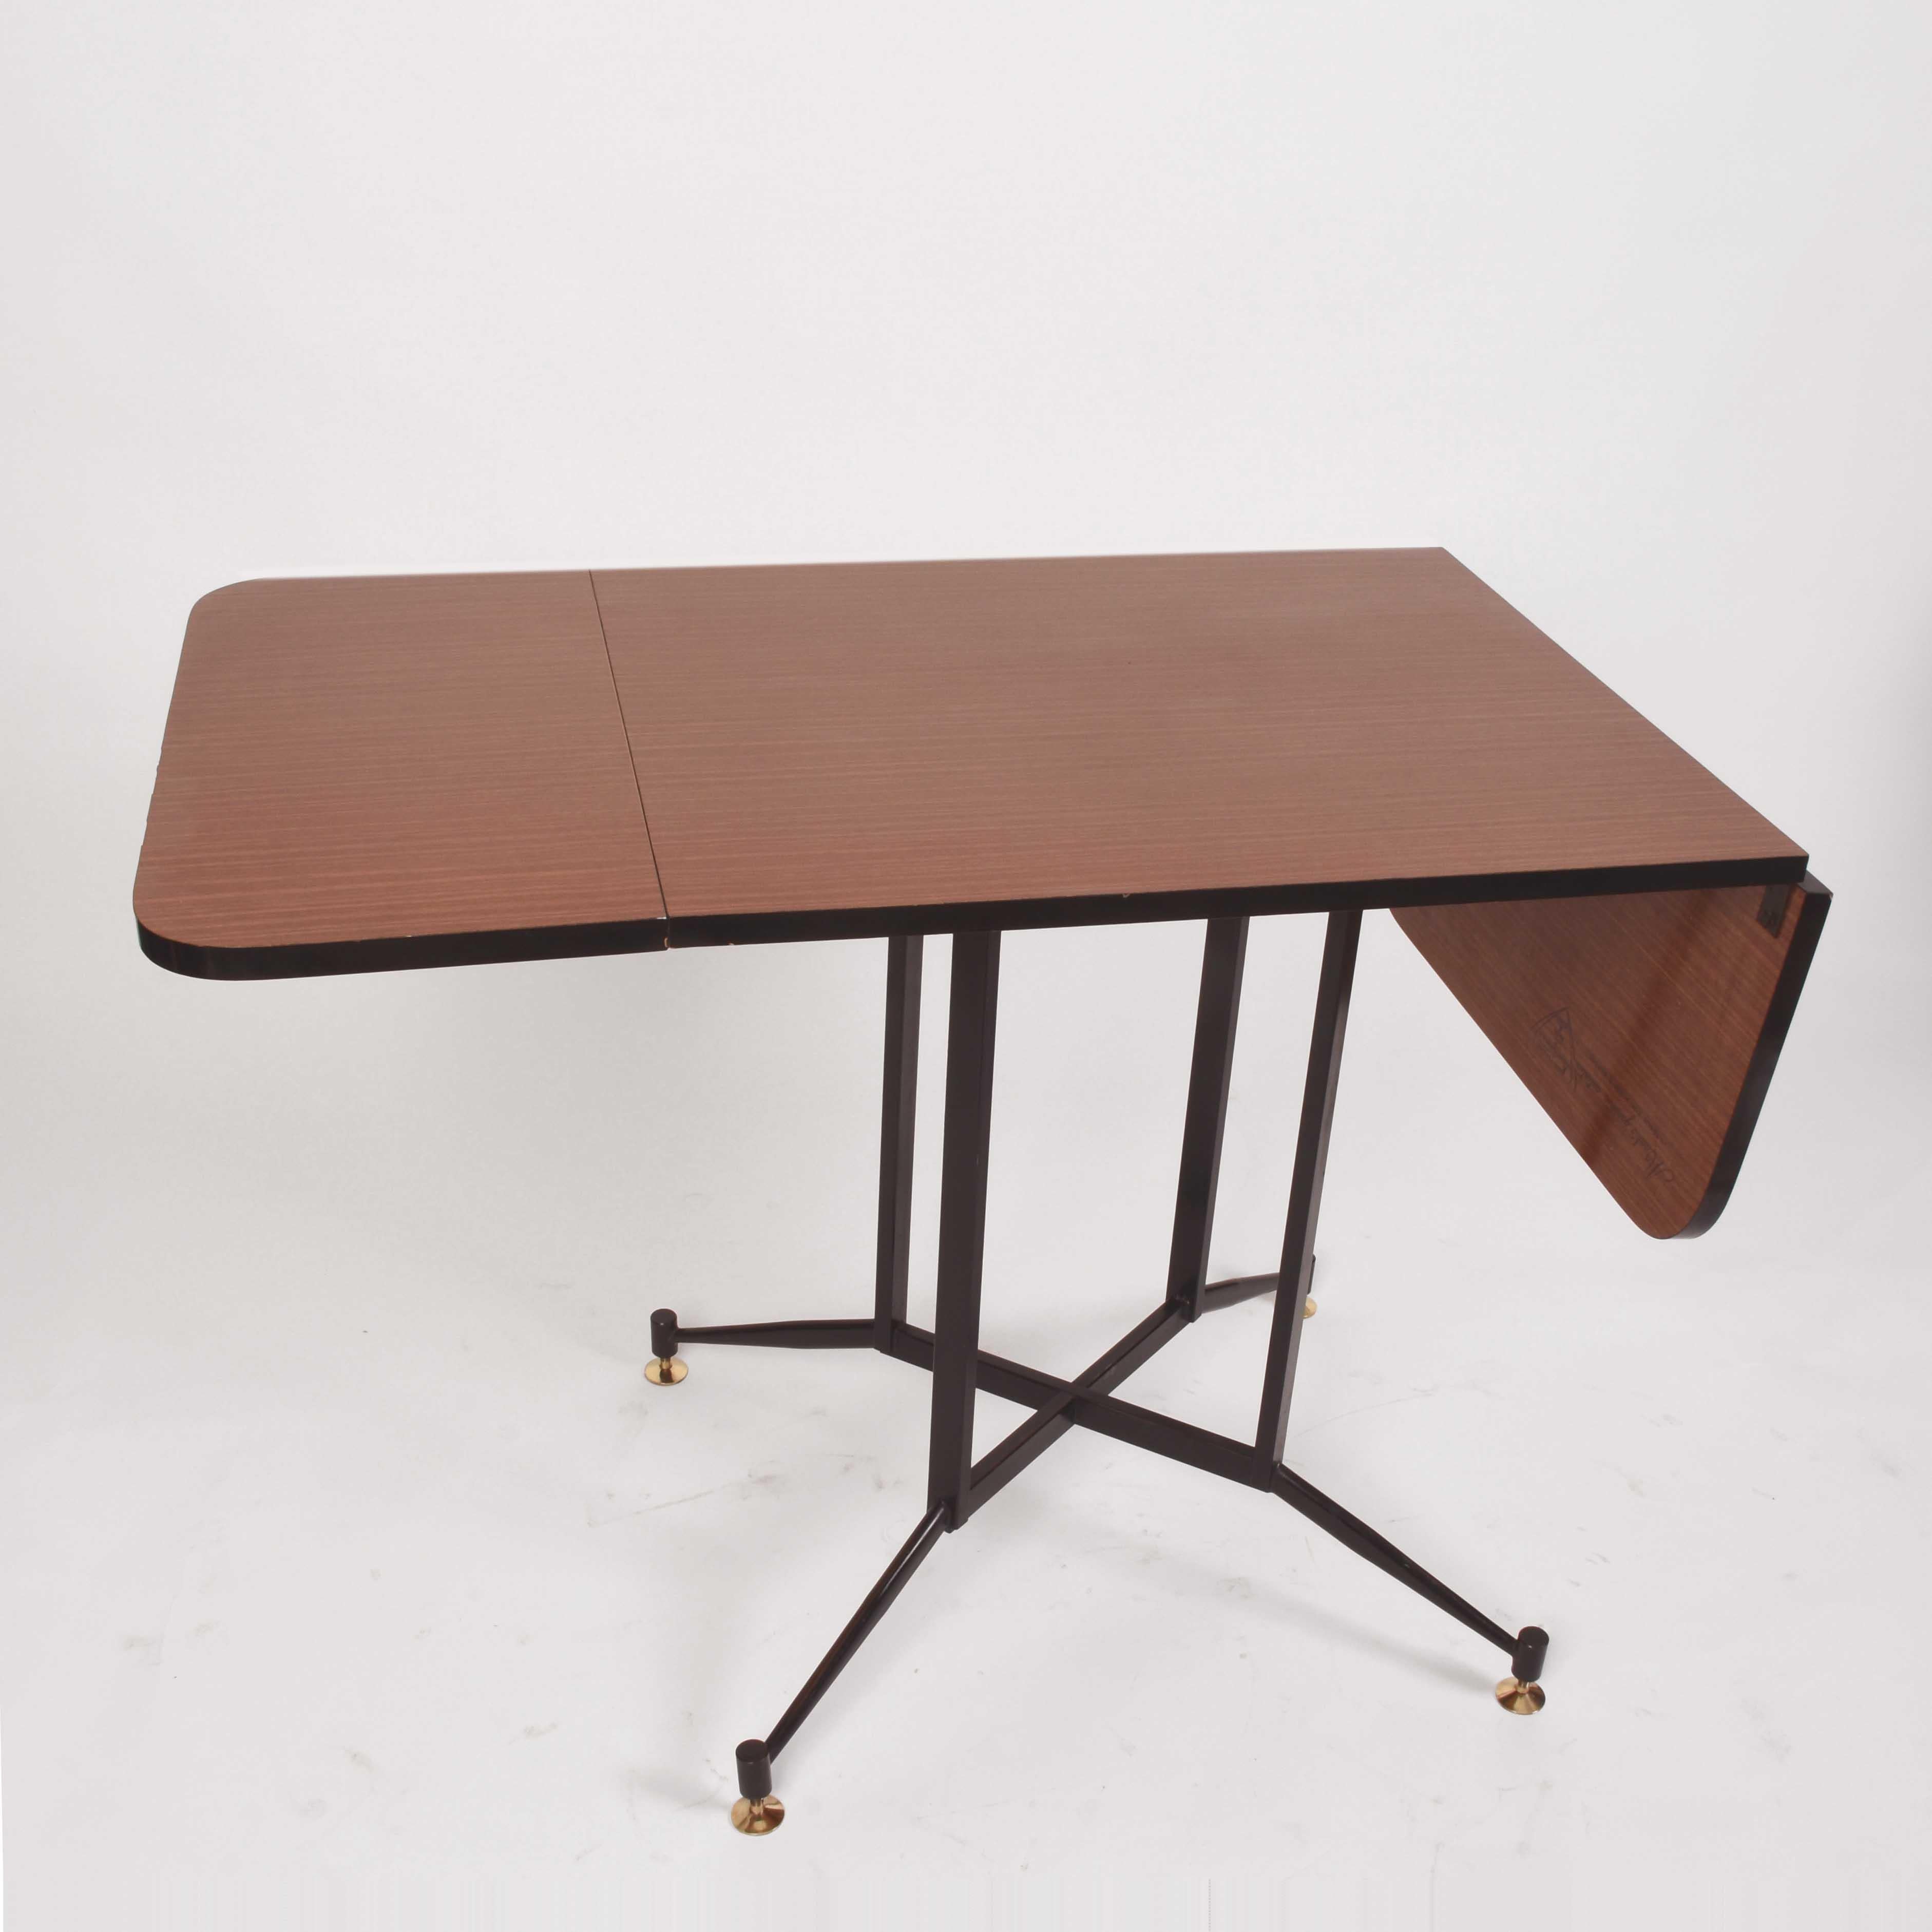 Mid-Century Modern Gardella Midcentury Formica Steel and Brass Table, Laminati Plastici Italy 1950s For Sale